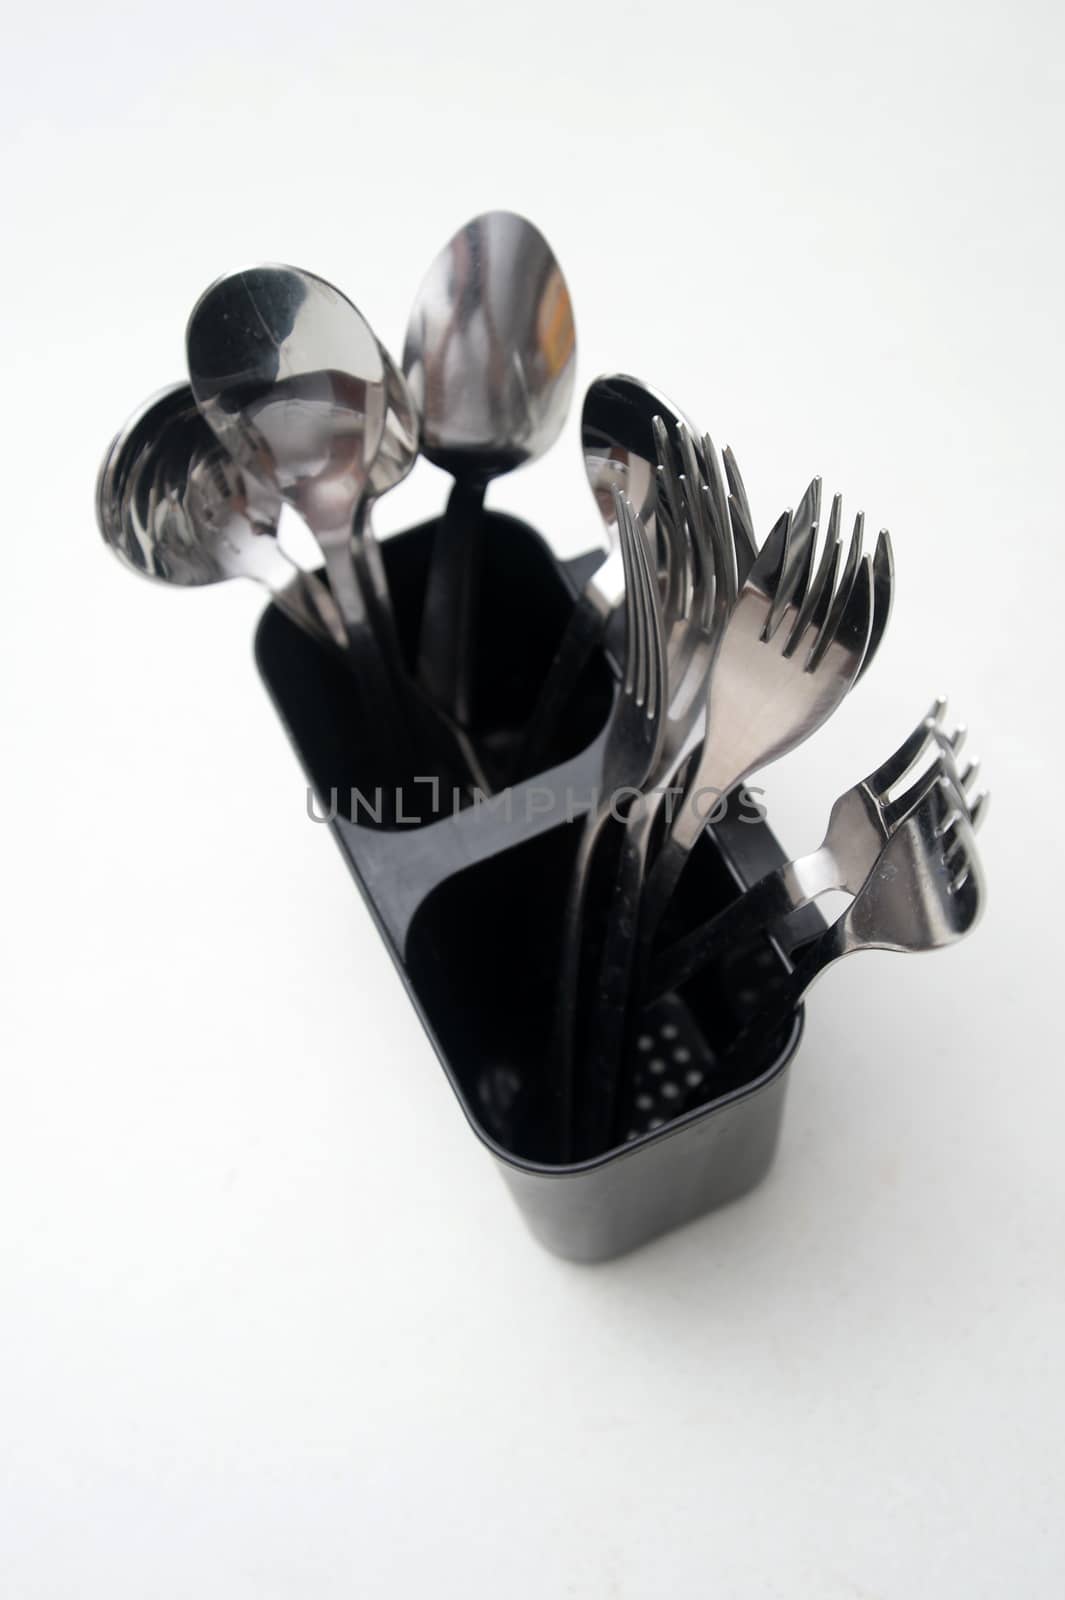 Cutlery by Kitch